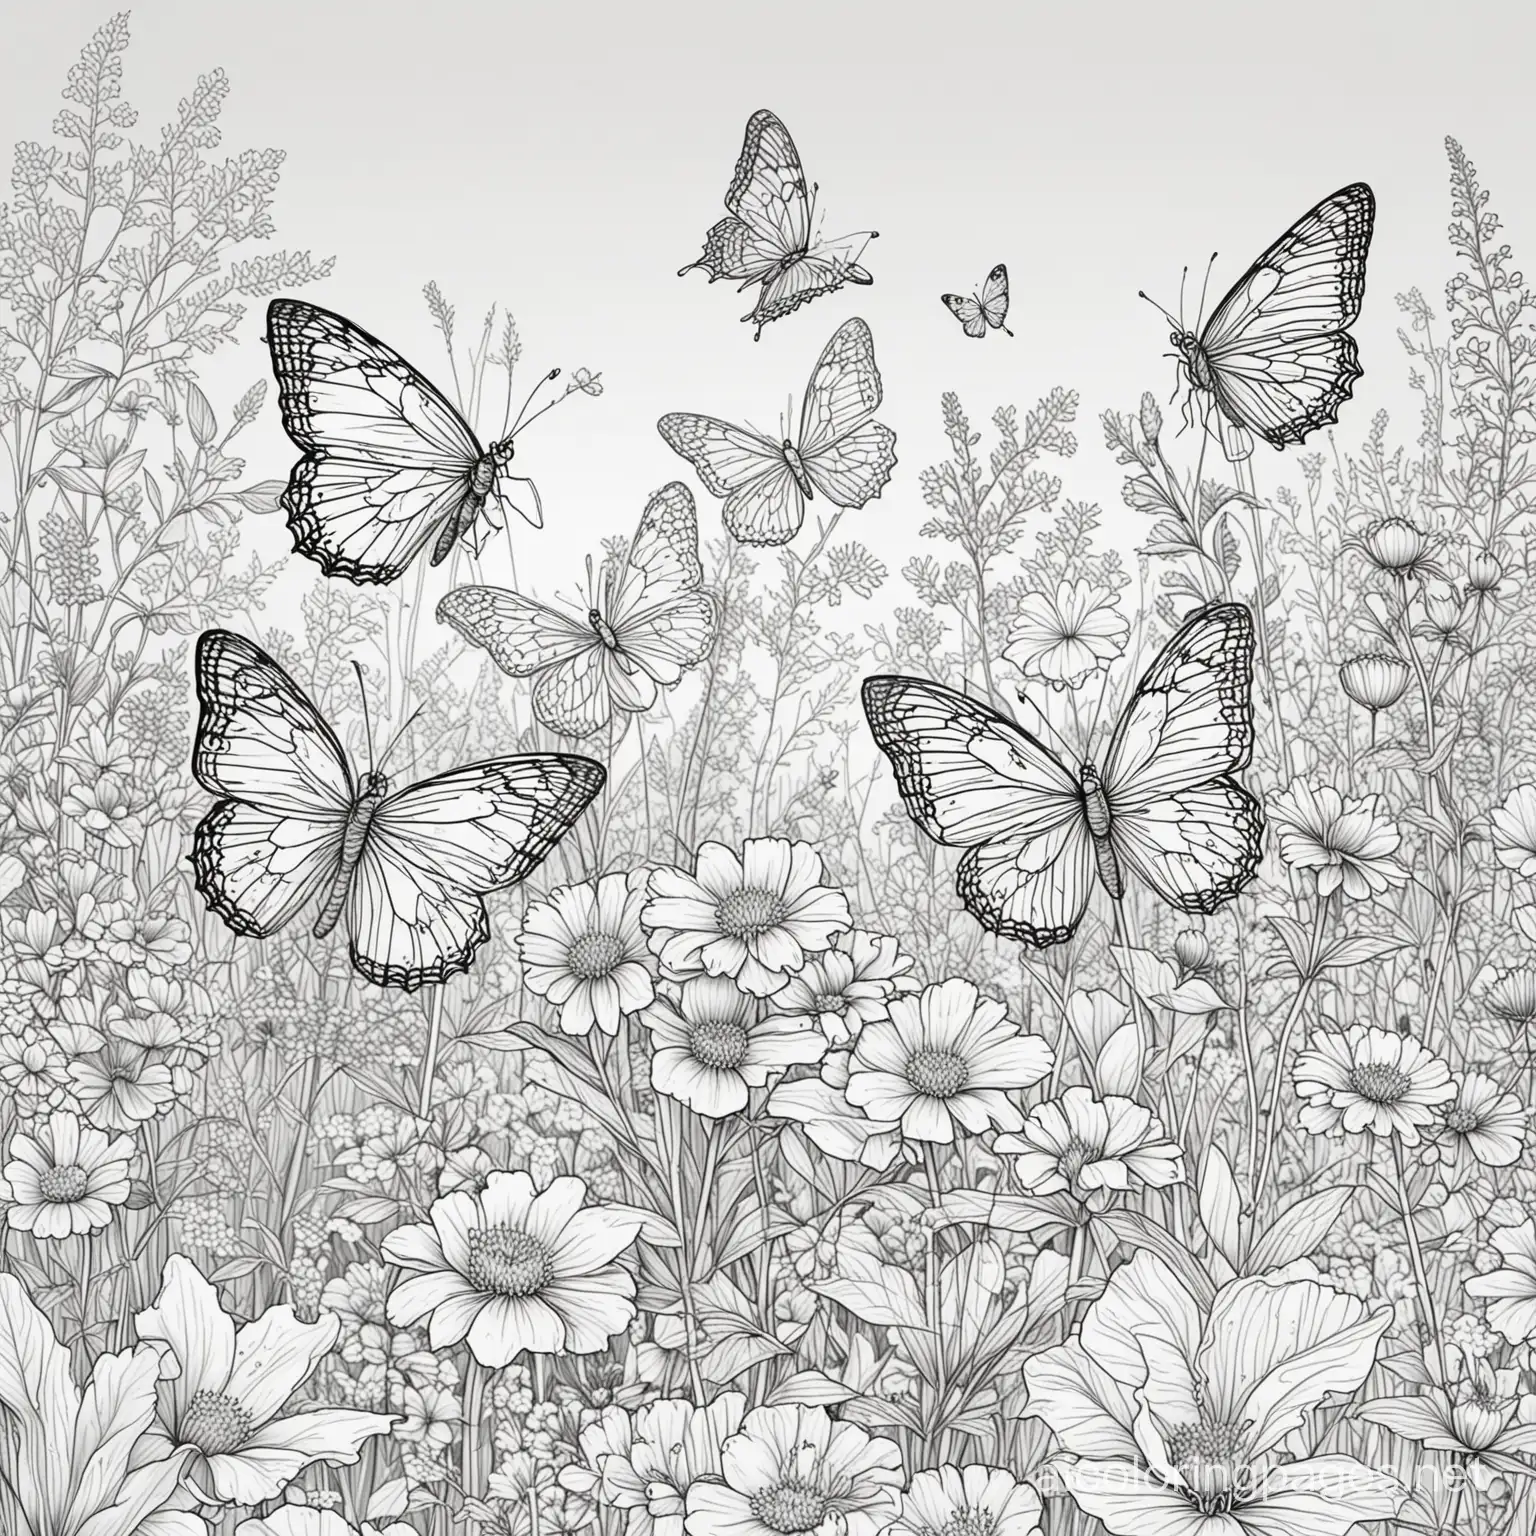 butterflies in a wild flower garden, Coloring Page, black and white, line art, white background, Simplicity, Ample White Space. The background of the coloring page is plain white to make it easy for young children to color within the lines. The outlines of all the subjects are easy to distinguish, making it simple for kids to color without too much difficulty